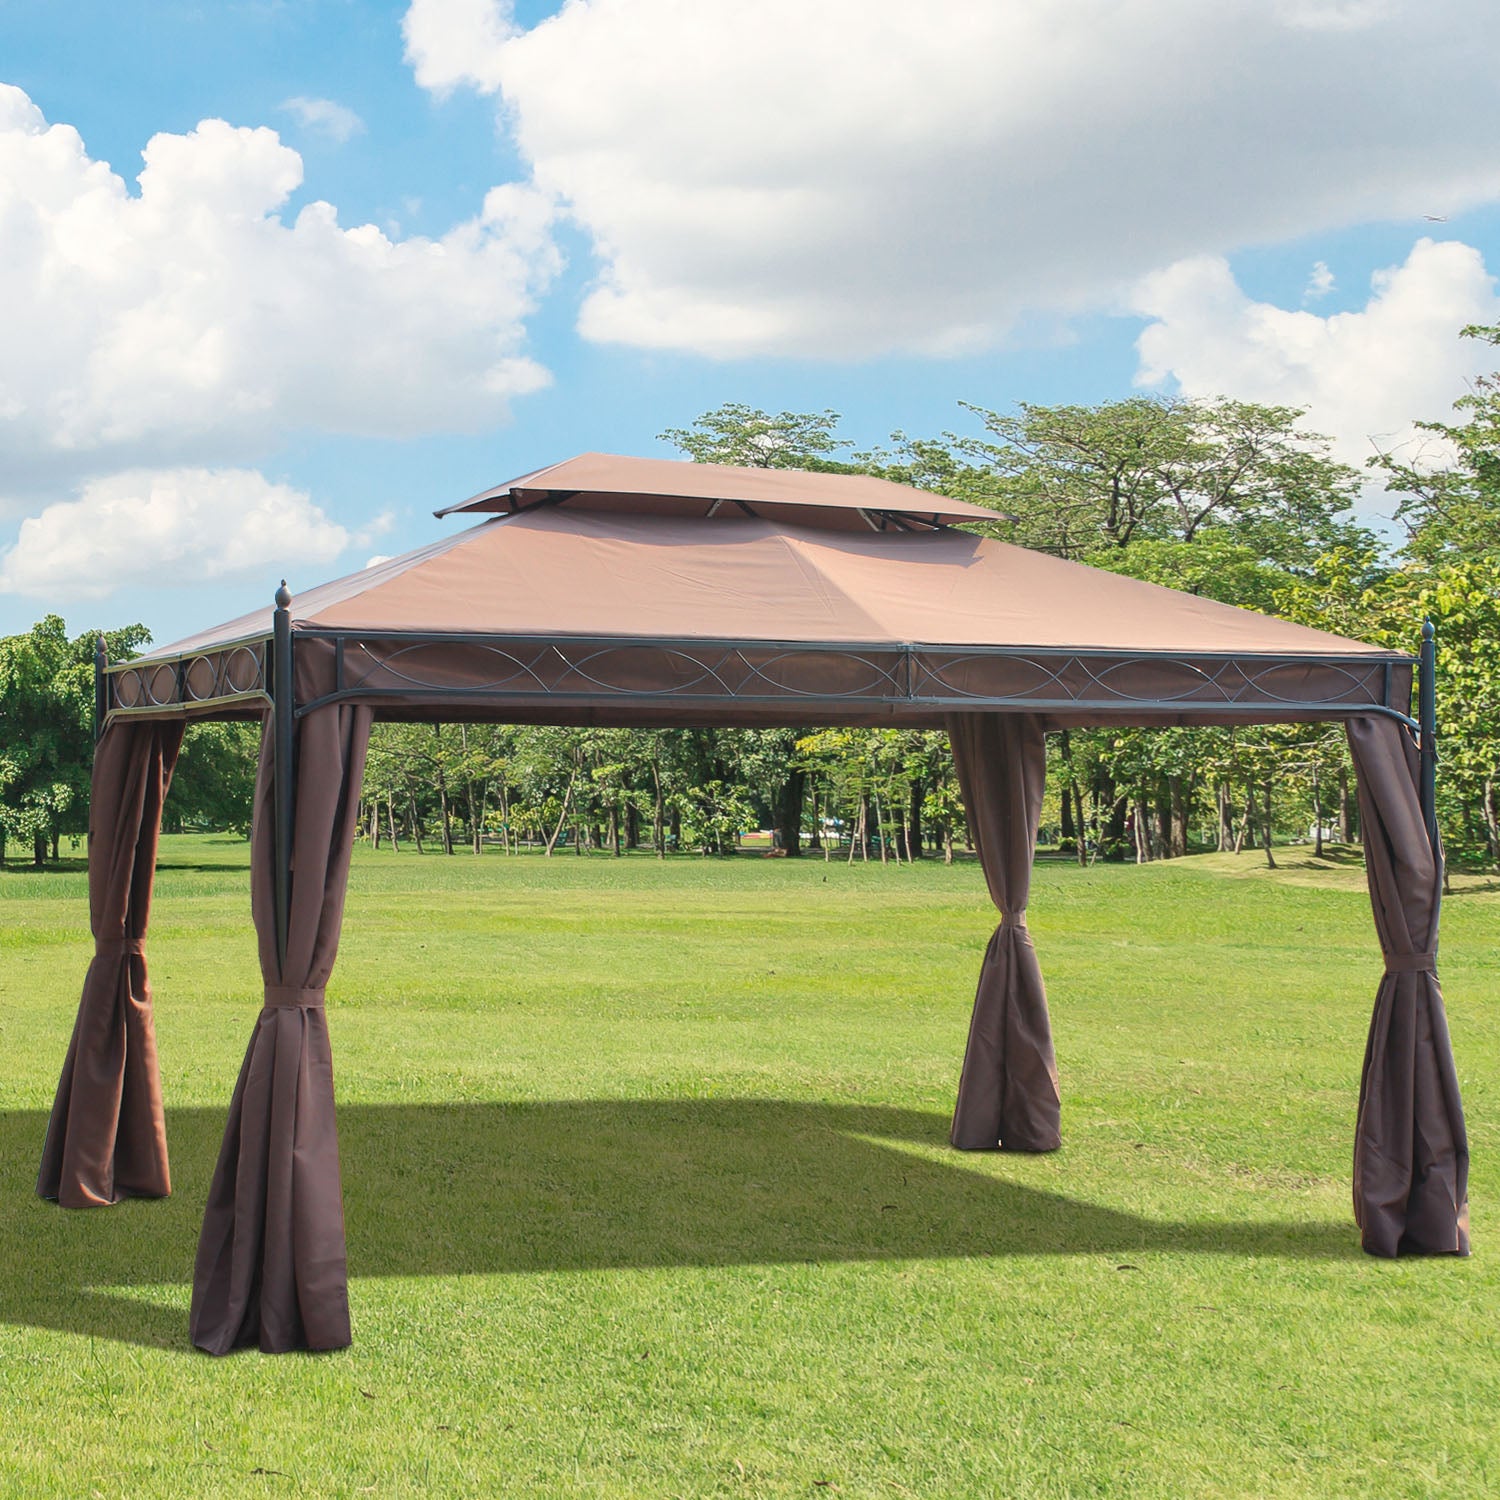 Outsunny 3 x 4m Garden Metal Gazebo Marquee Patio Party Tent Canopy Shelter with Sidewalls Pavilion New - OutdoorBox